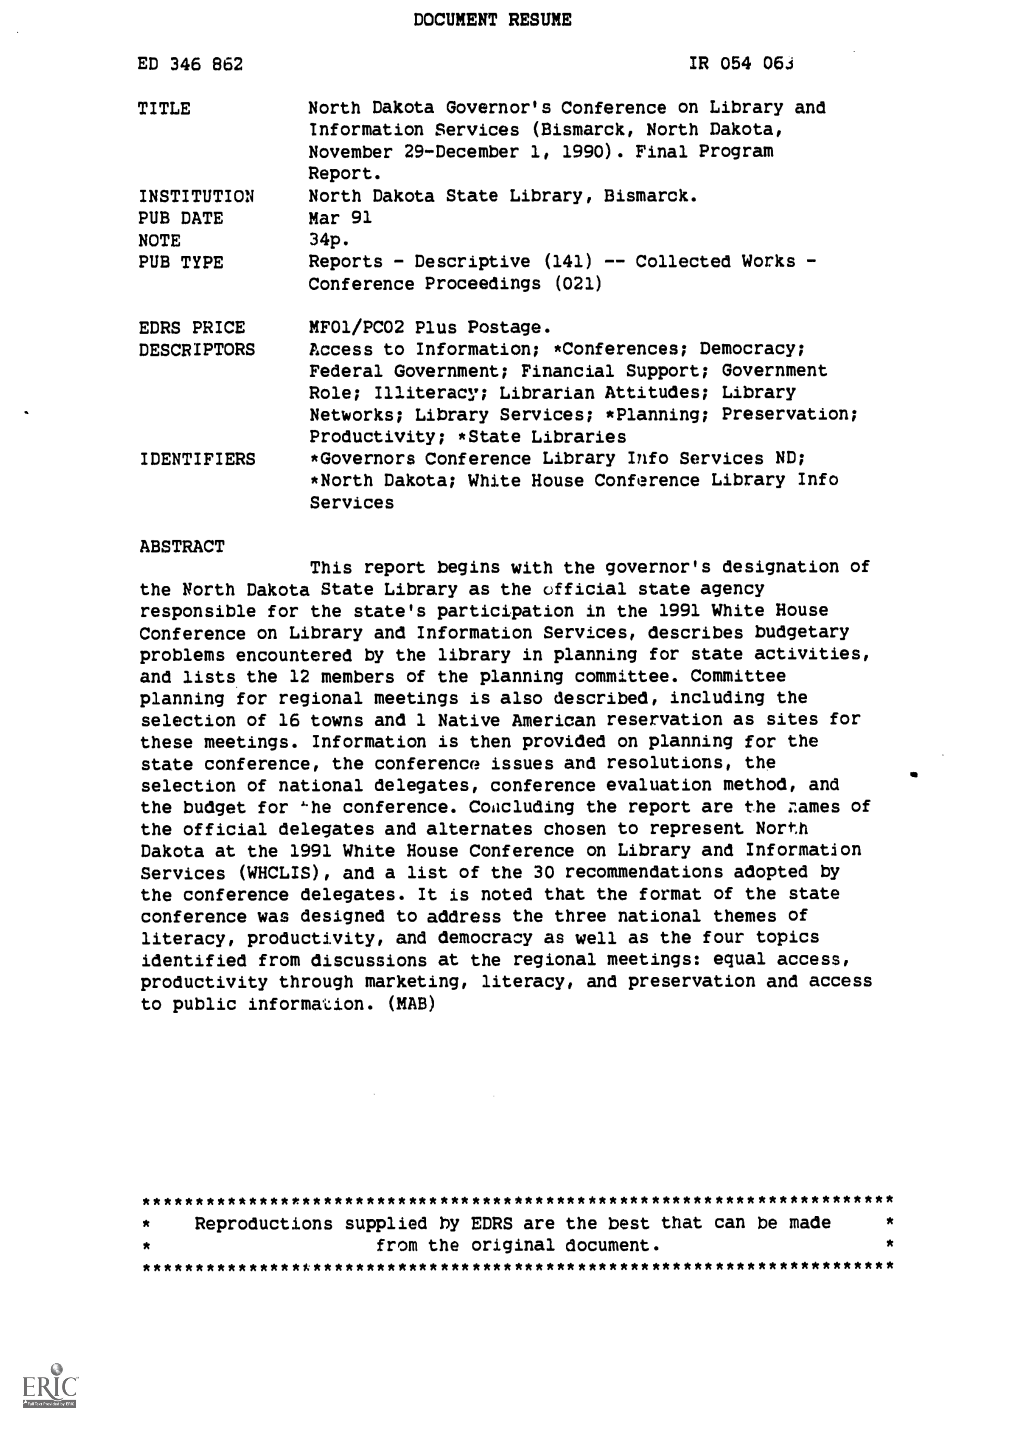 DOCUMENT RESUME ED 346 862 IR 054 063 TITLE North Dakota Governor's Conference on Library and Information Services